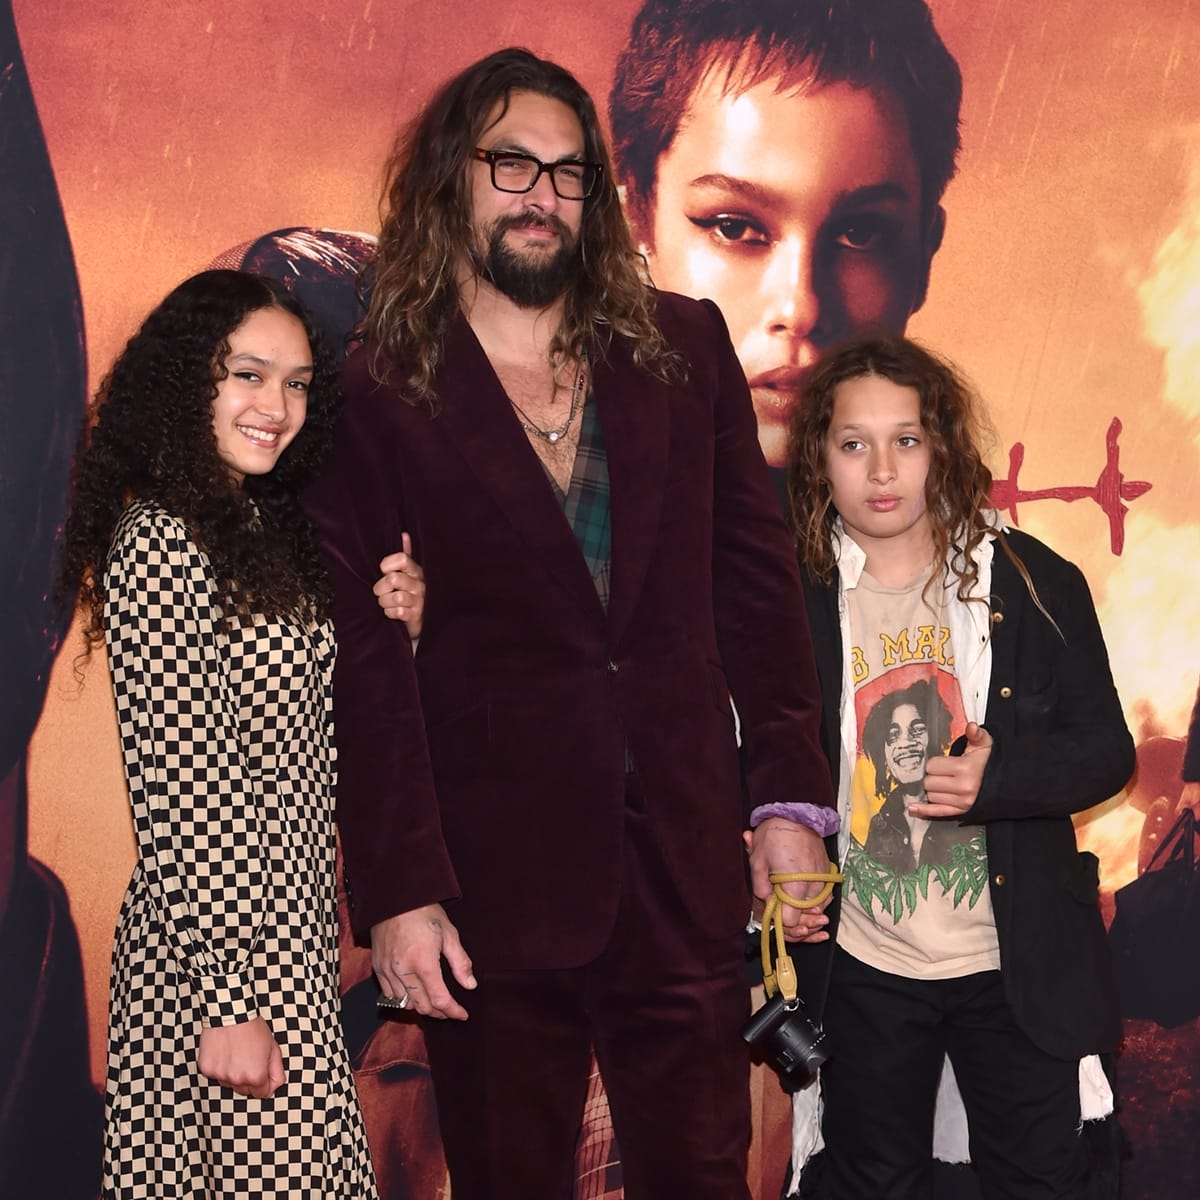 Lola and son Nakoa-Wolf came with their dad Jason Momoa to support their half-sister Zoë Isabella Kravitz